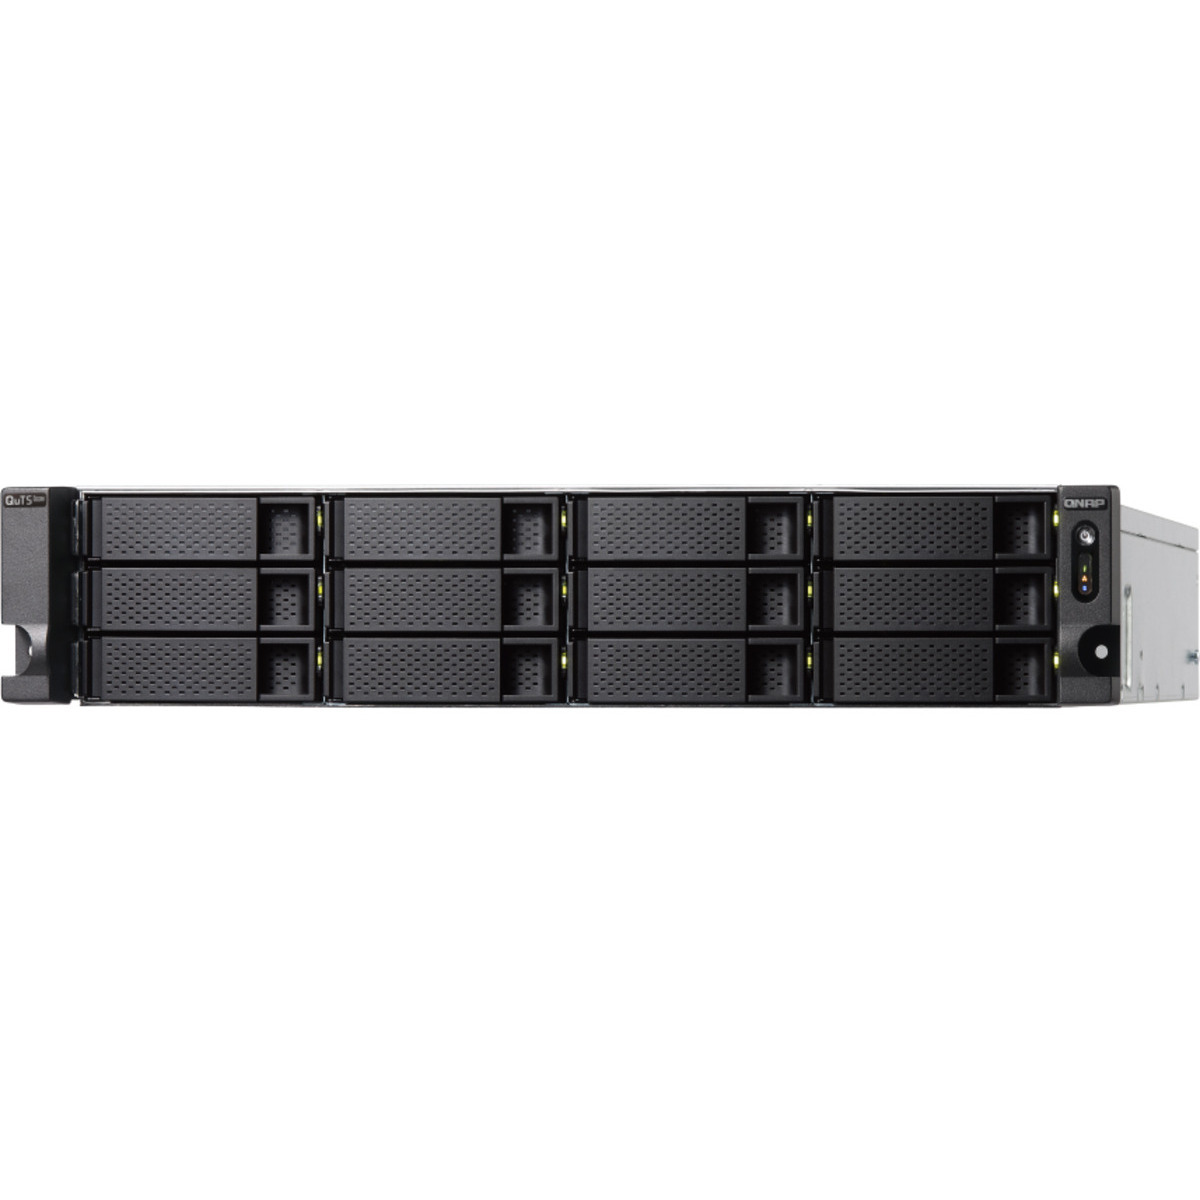 QNAP TS-h1886XU-RP R2 QuTS hero Edition 96tb 12+6-Bay RackMount Large Business / Enterprise NAS - Network Attached Storage Device 8x12tb Seagate IronWolf Pro ST12000NT001 3.5 7200rpm SATA 6Gb/s HDD NAS Class Drives Installed - Burn-In Tested - ON SALE TS-h1886XU-RP R2 QuTS hero Edition